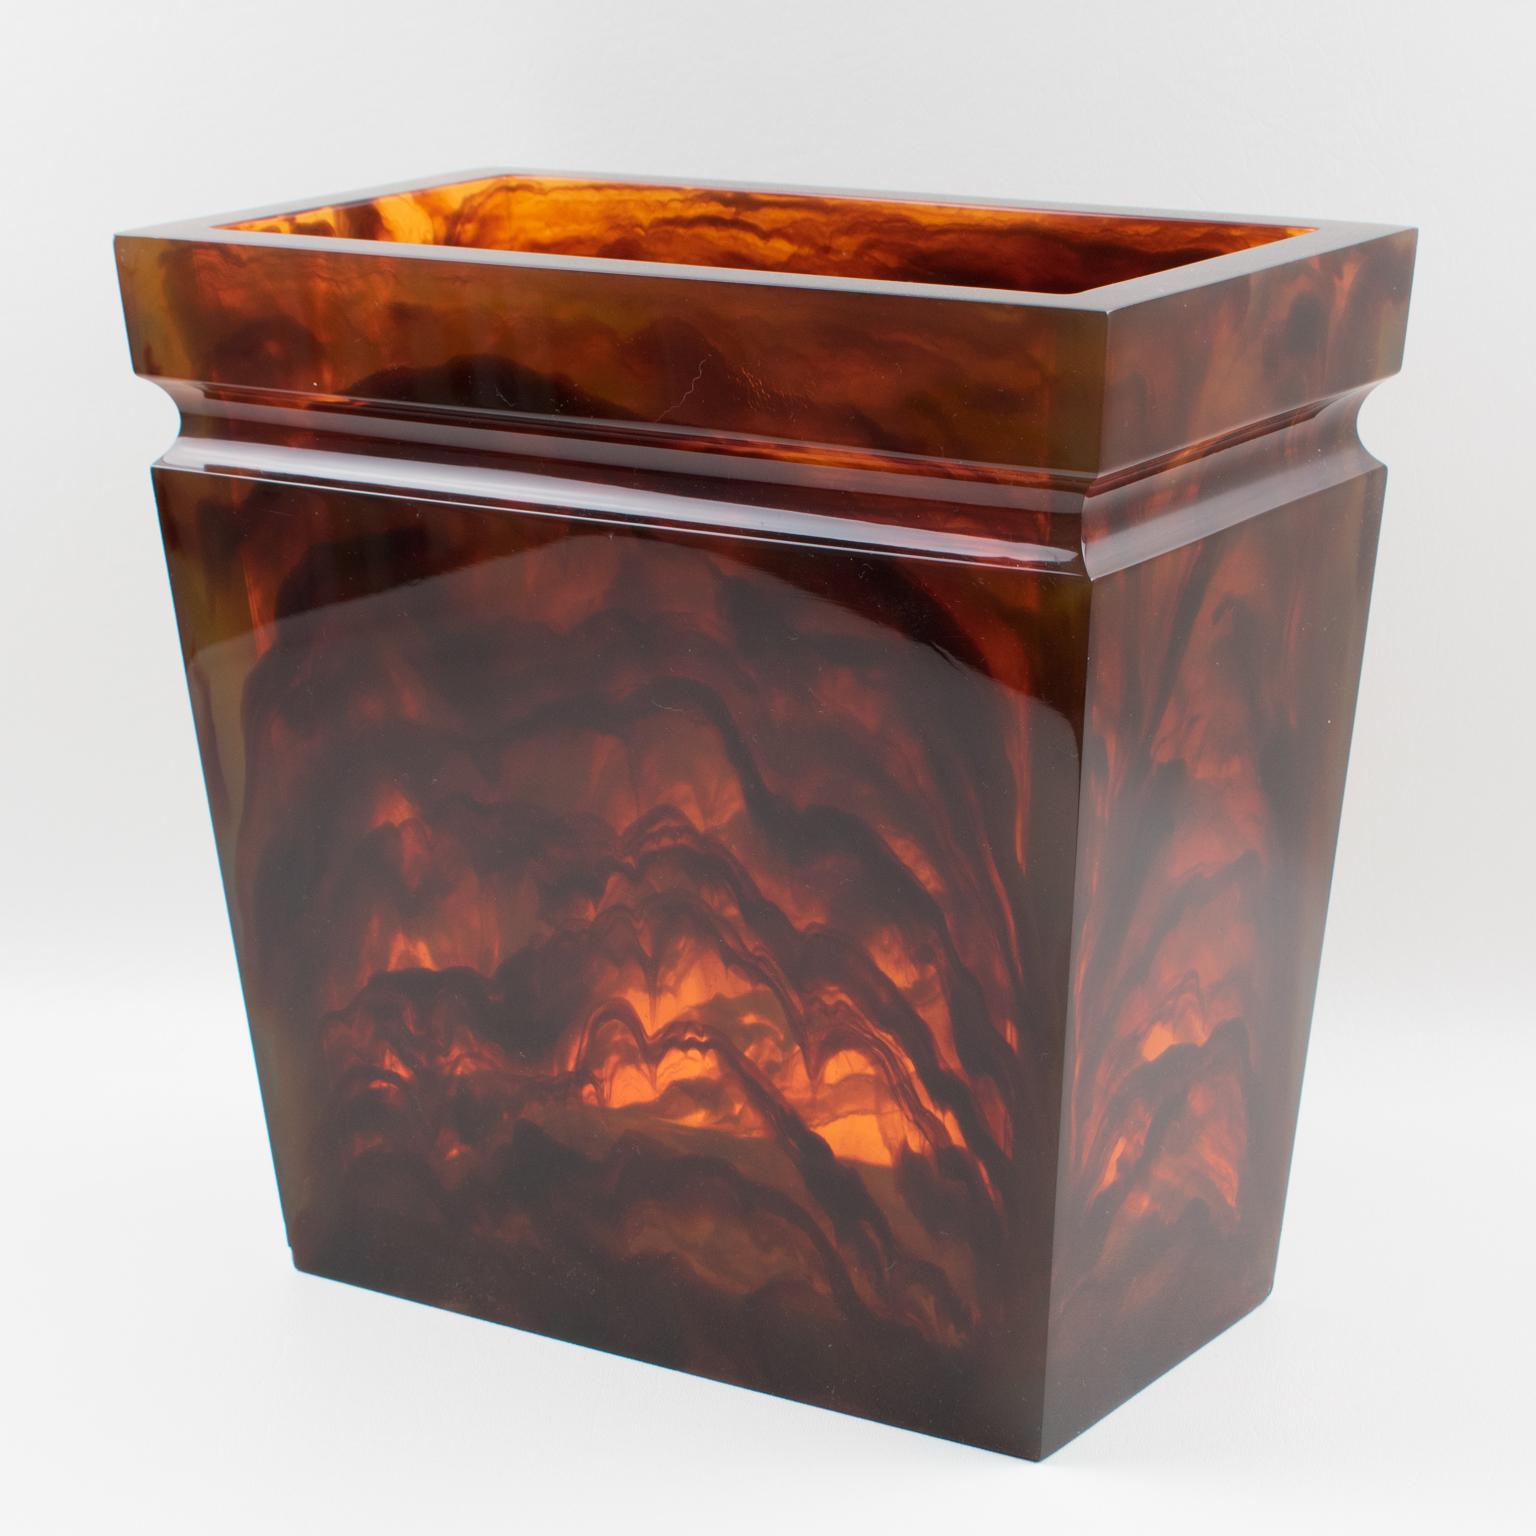 Stunning 1970s modernist tortoise Lucite paper waste basket. Tall rectangular shape extra thick walled sides. Gorgeous tortoiseshell pattern with red tea amber marble color and lots of translucency. No visible maker's mark.
Measurements: 11.25 in.